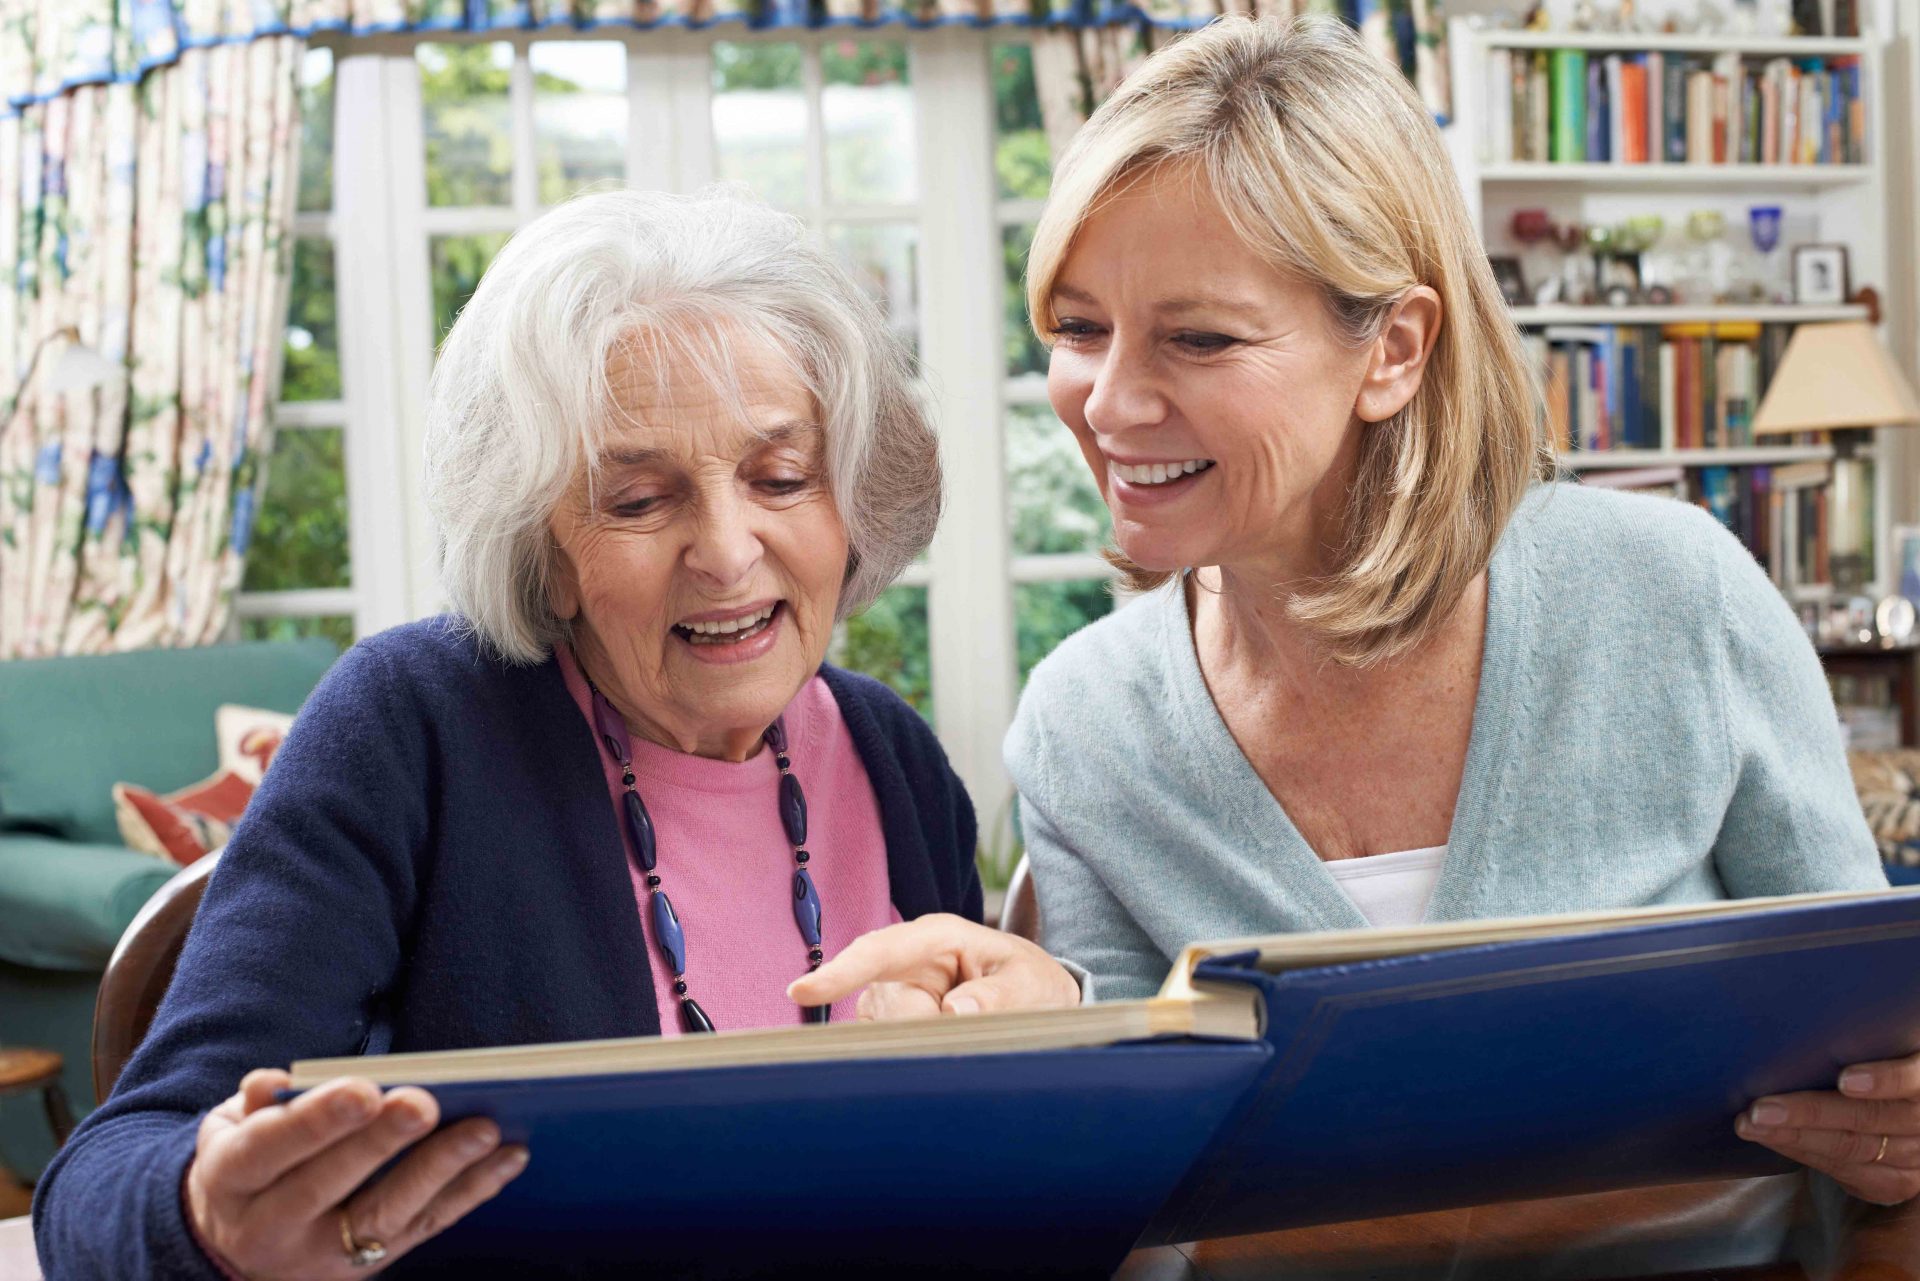 Two women smiling and looking at a photo album in a cozy living room with bookshelves.